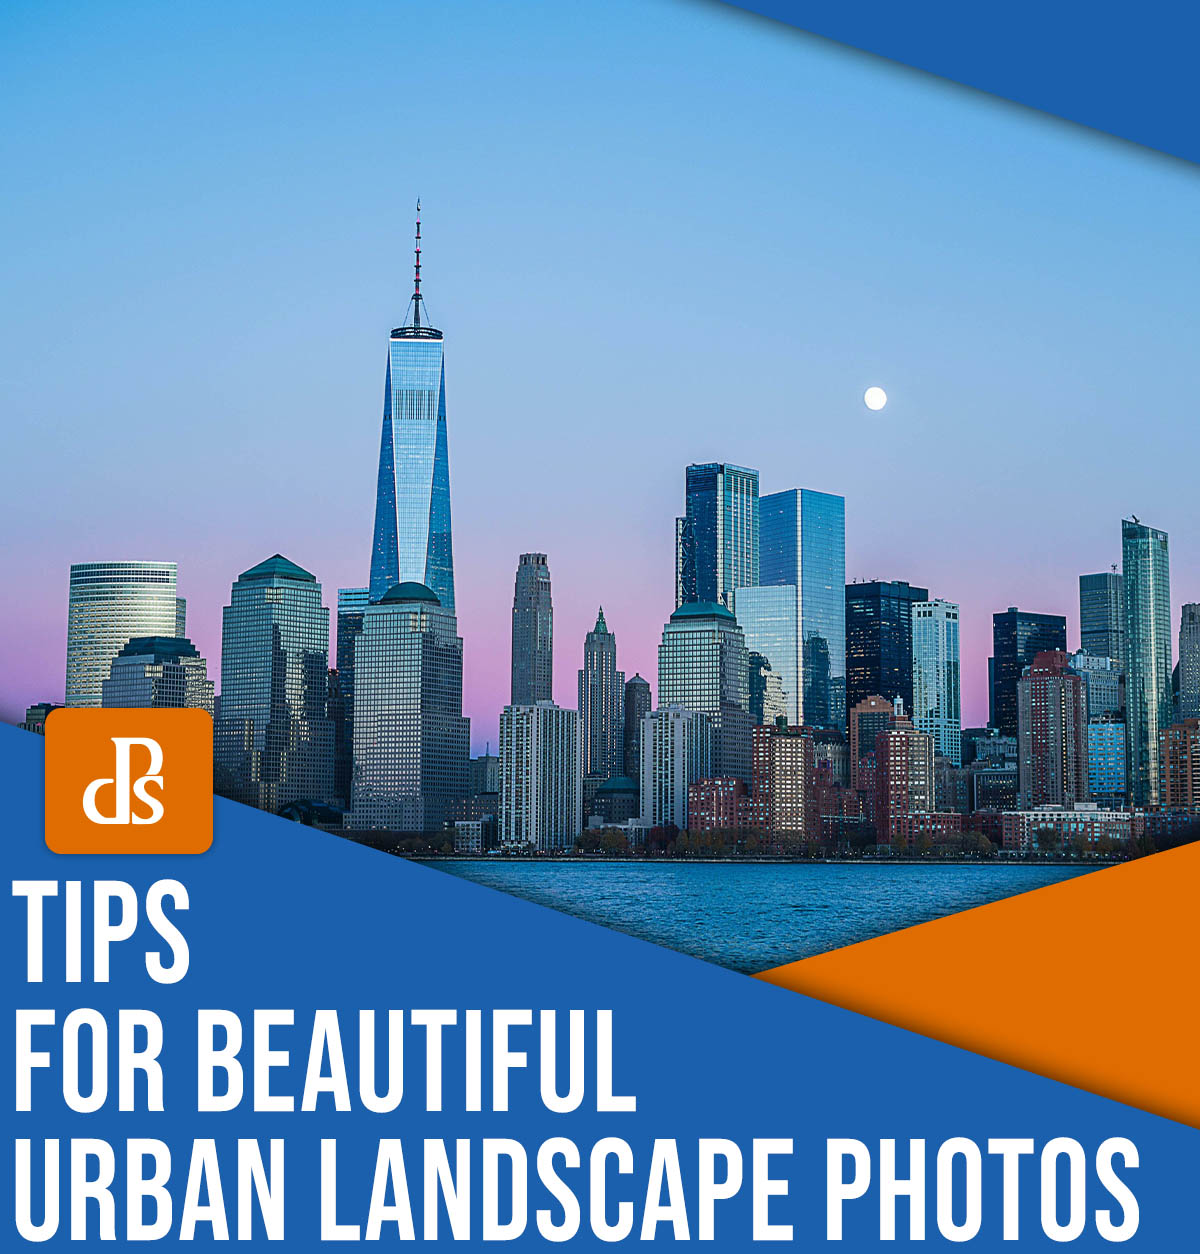 Tips for beautiful urban landscape photos